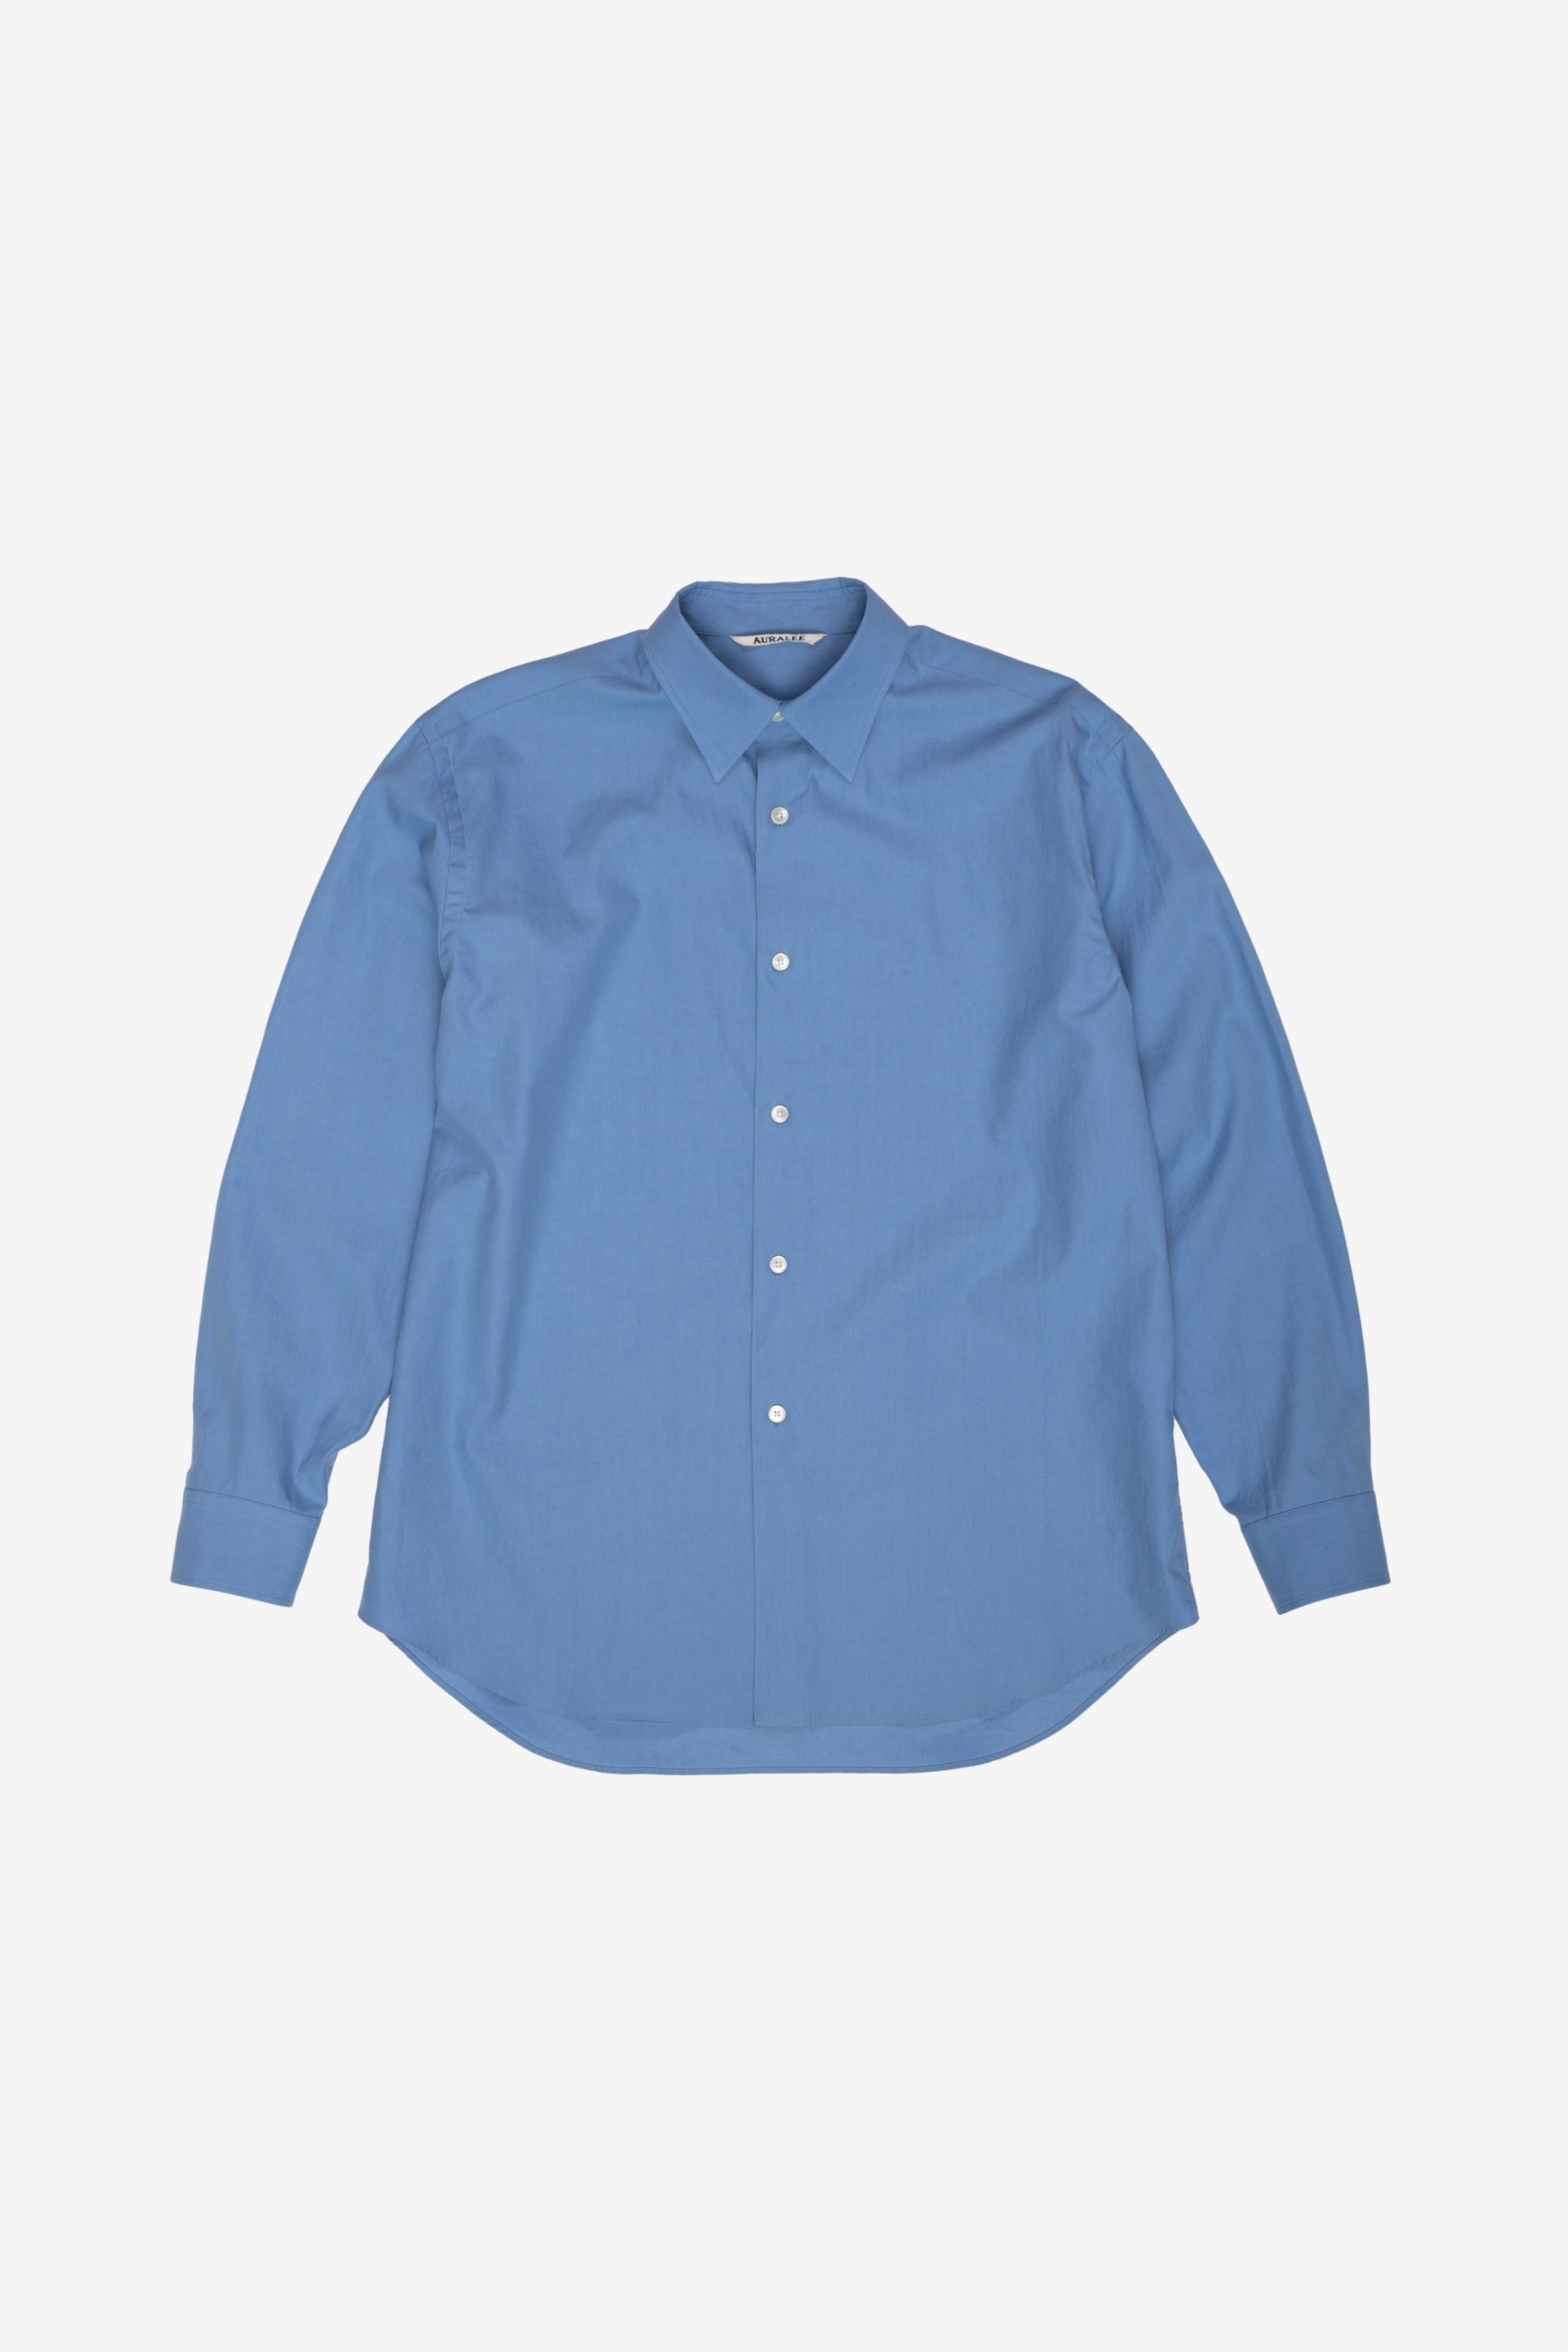 Washed Finx Twill Shirts in Twill Blue - Auralee | Afura Store